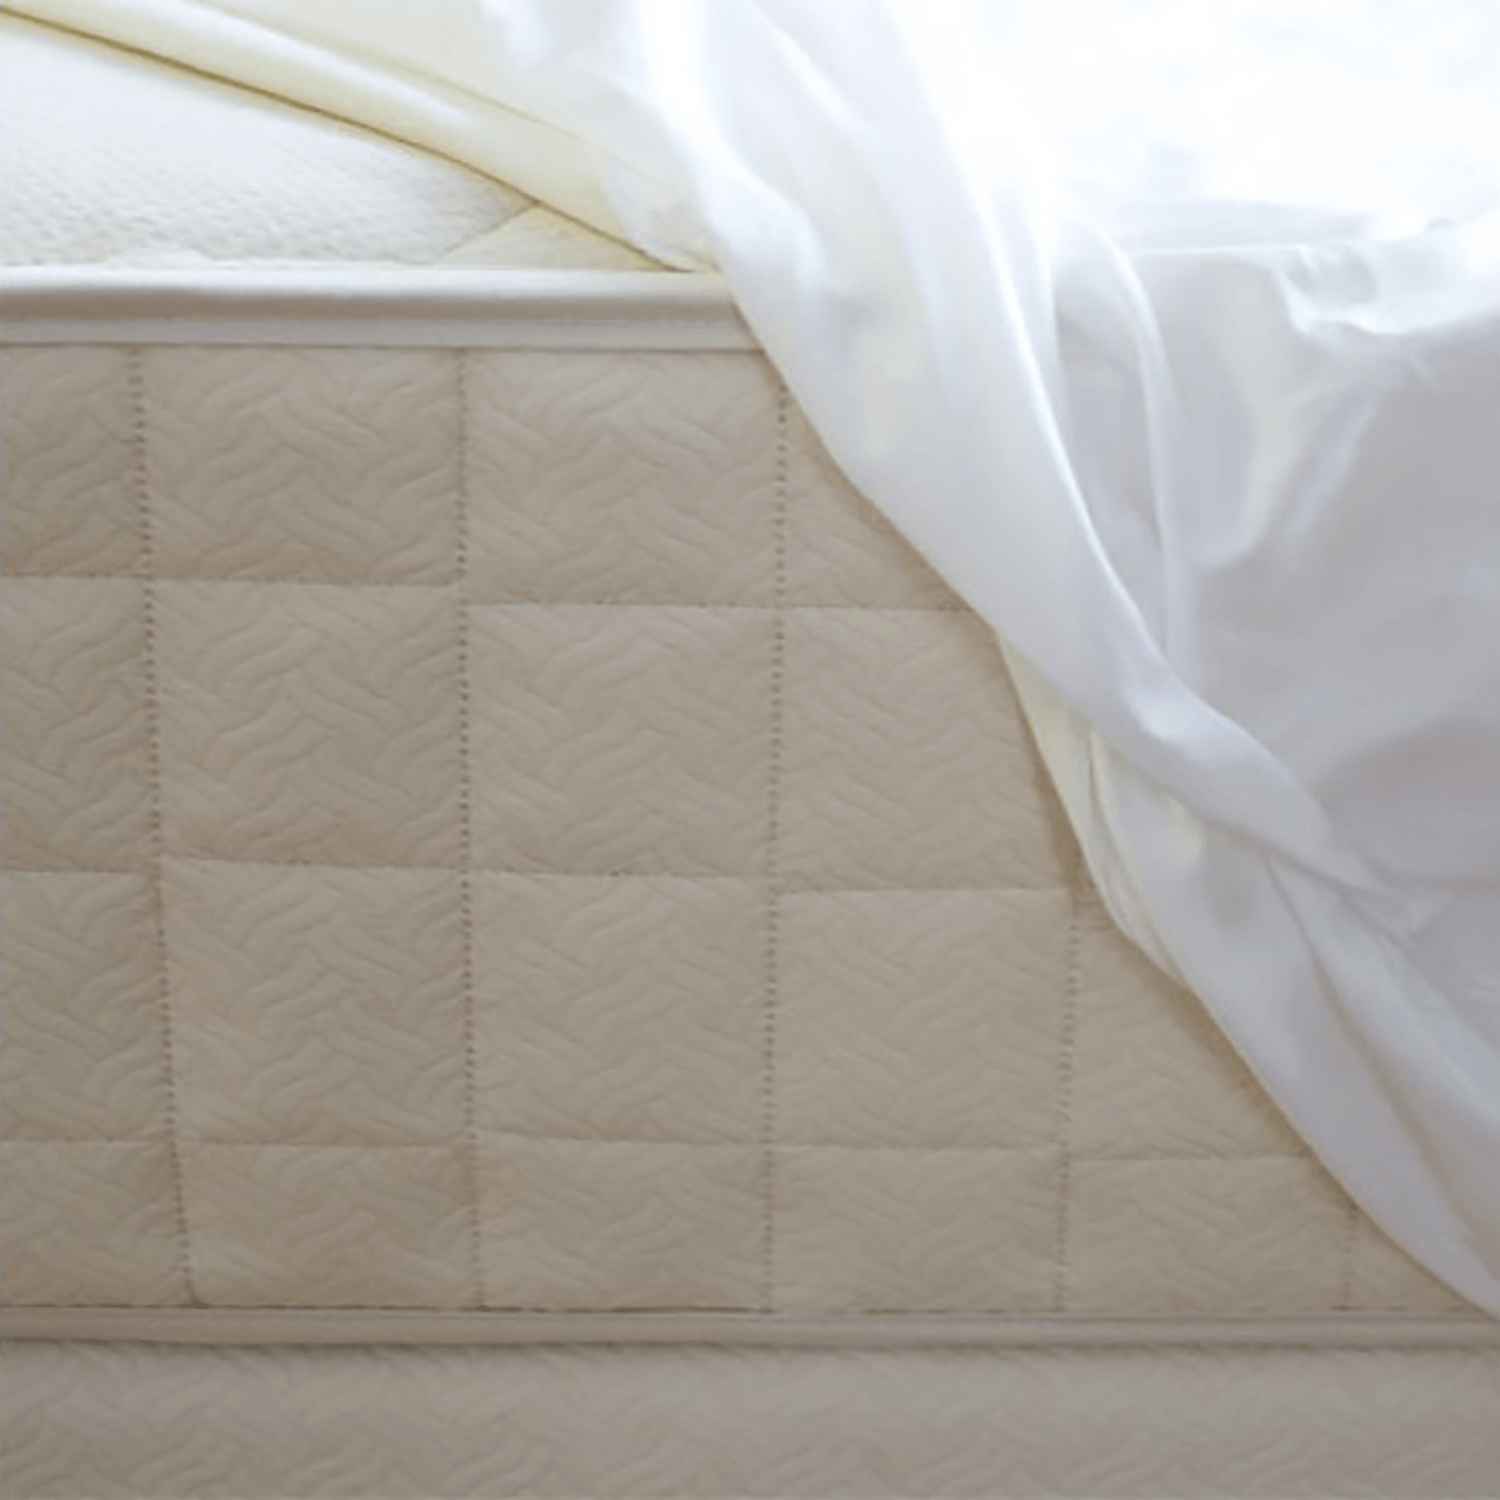 naturepedic protector mattress pad with straps